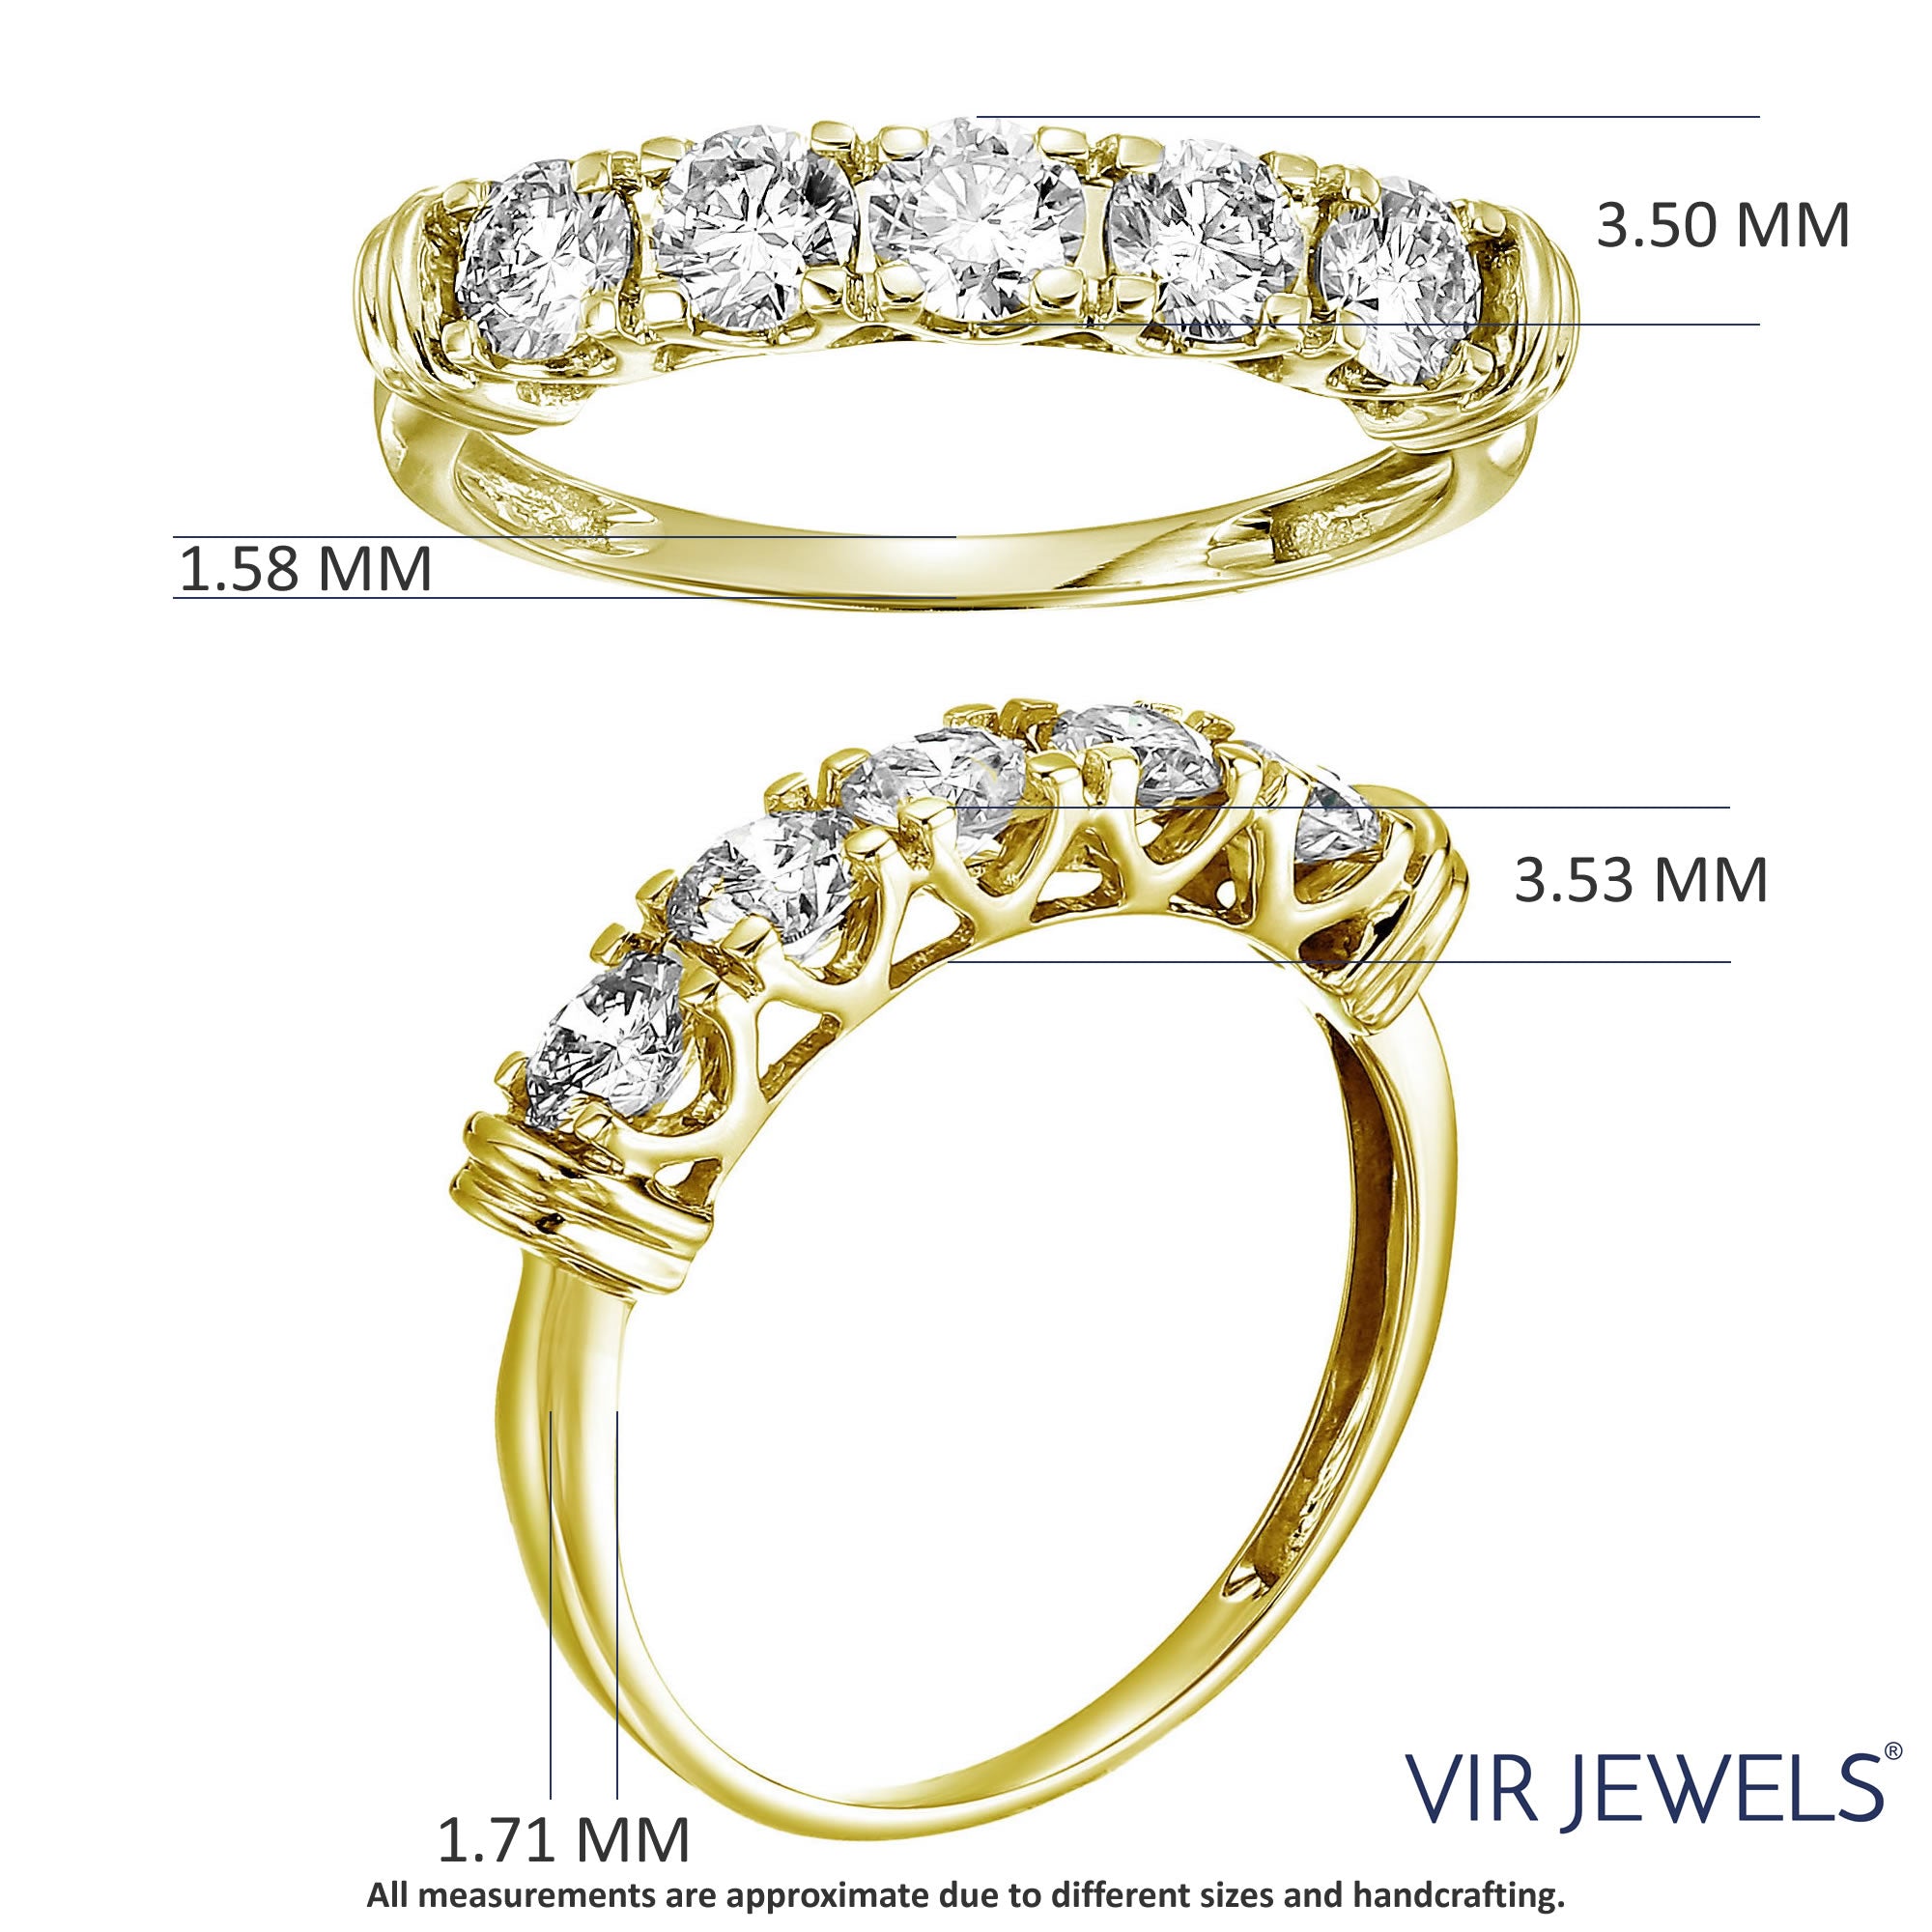 1 cttw Certified I1-I2 5 Stone Diamond Ring 14K Yellow Gold Engagement